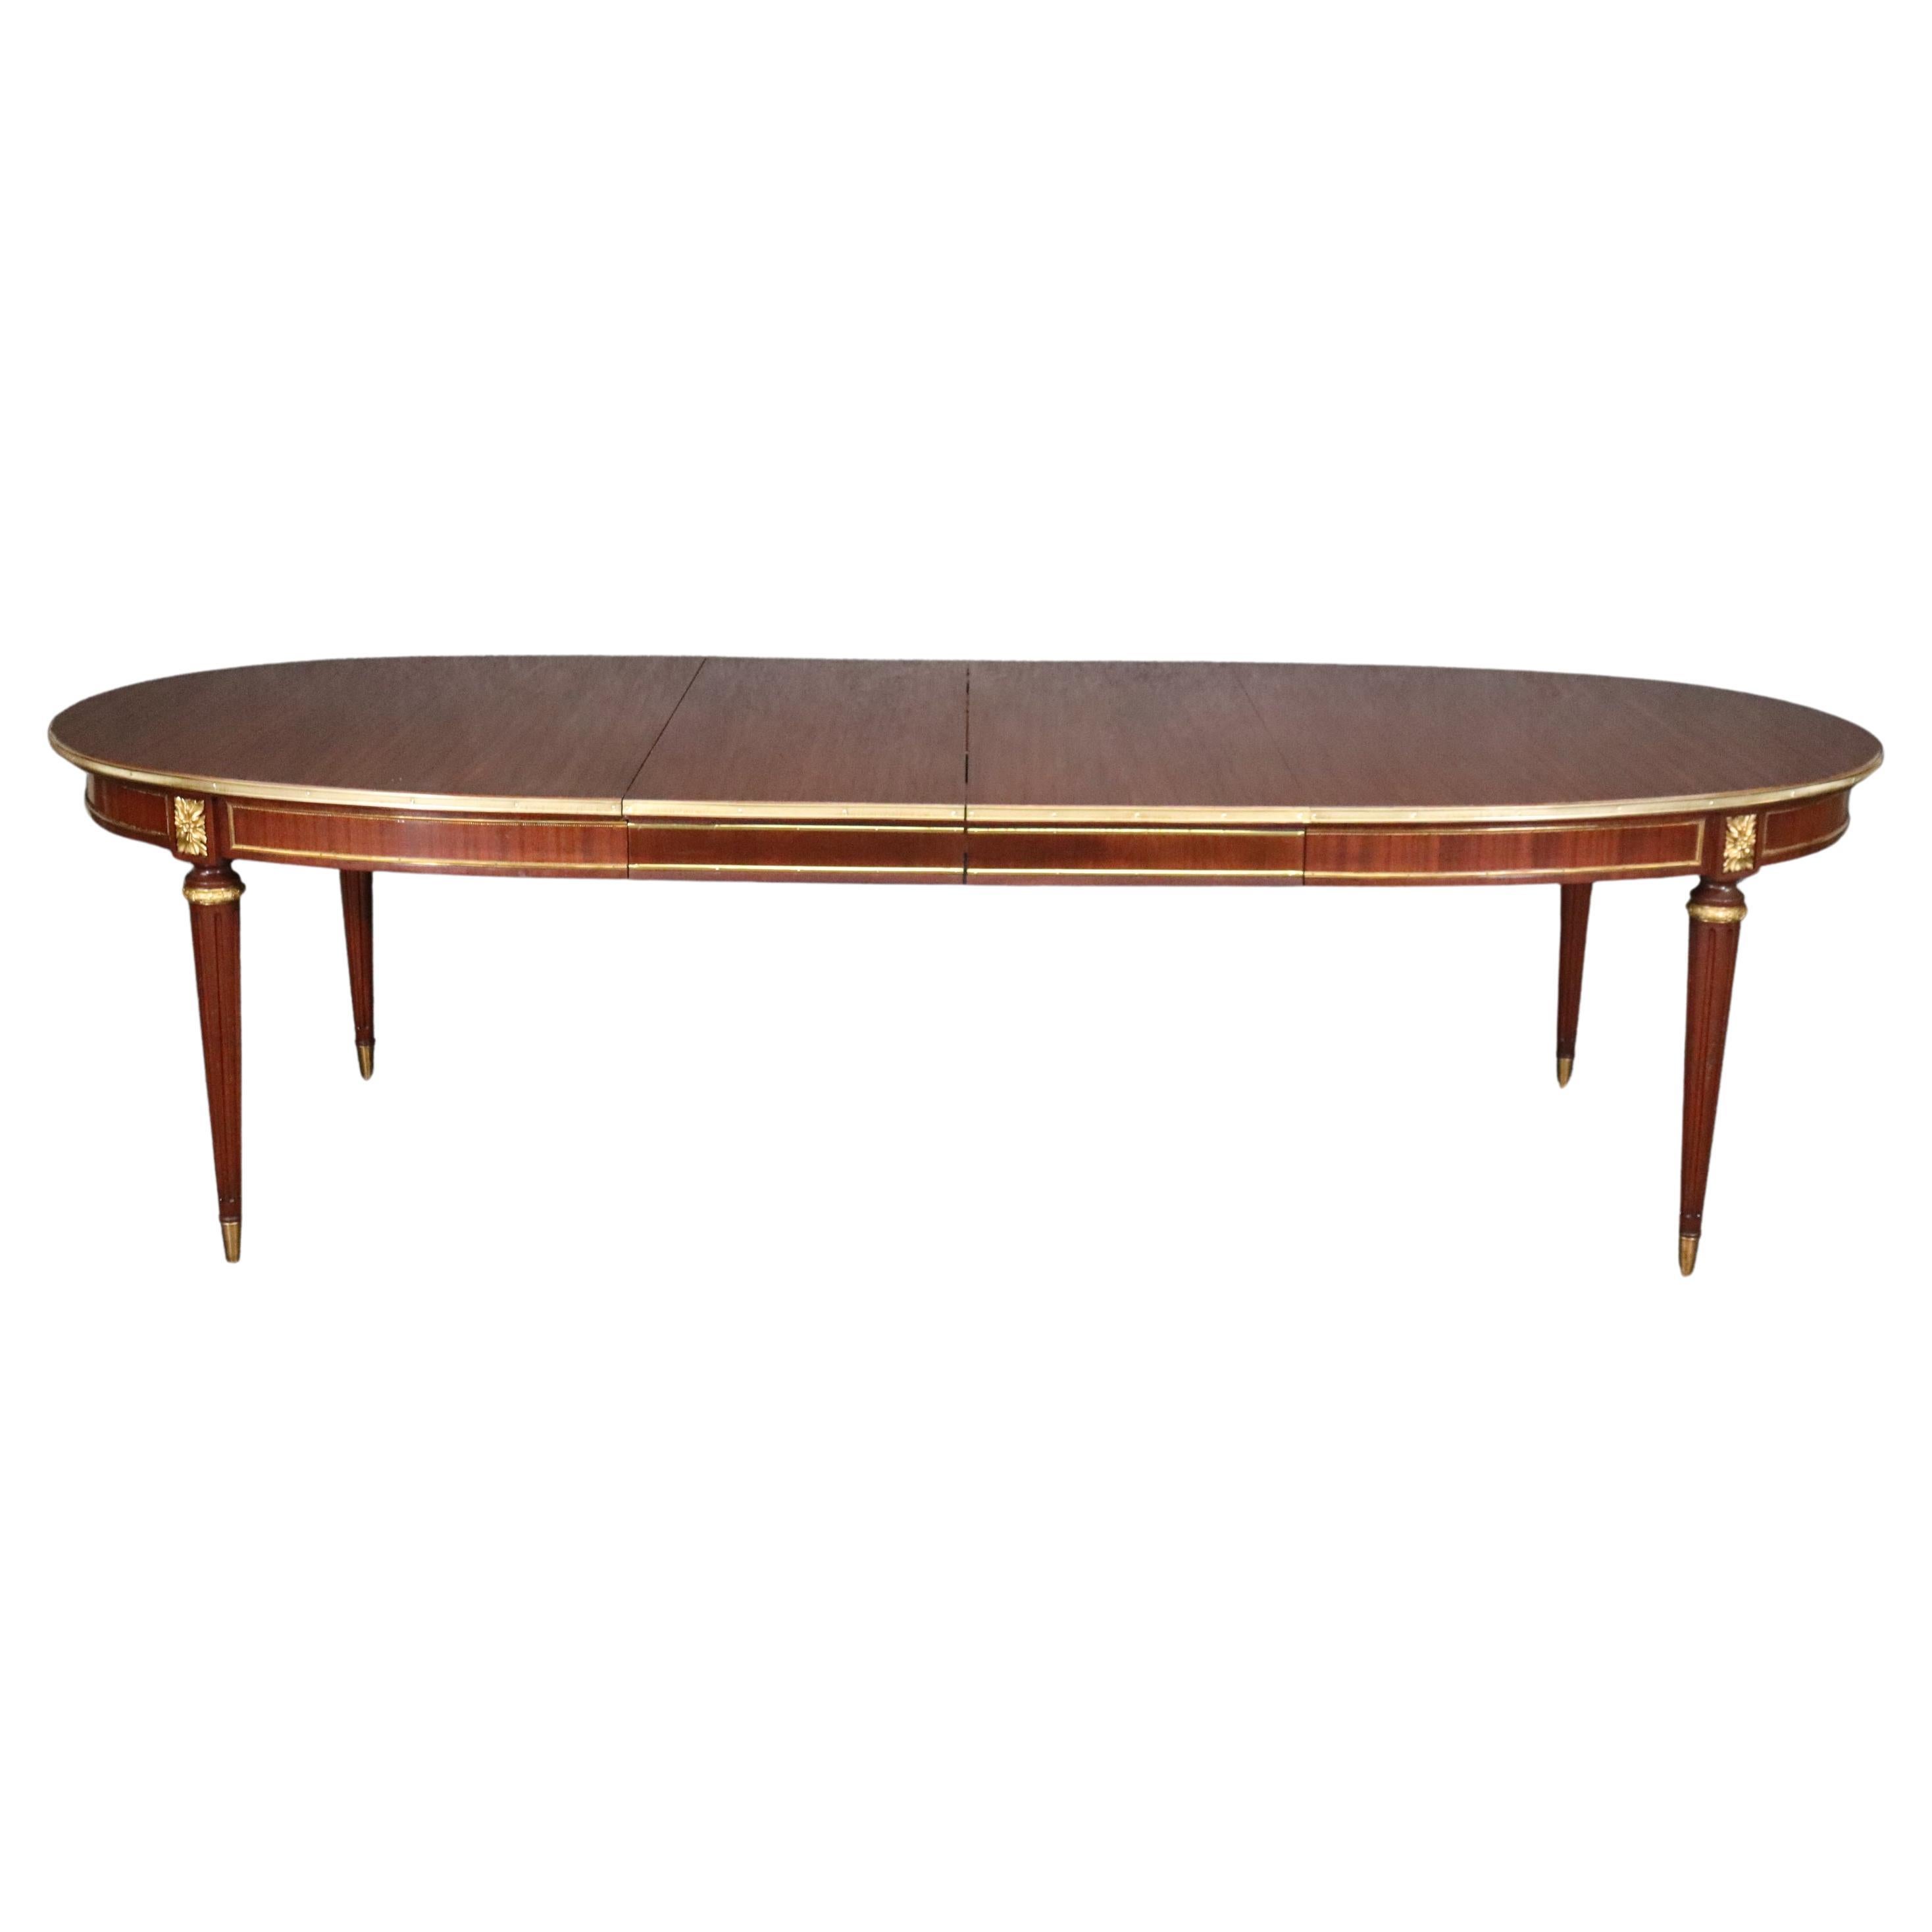 Maison Jansen Louis XVI Style Mahogany Dining Table With Two Leaves  For Sale